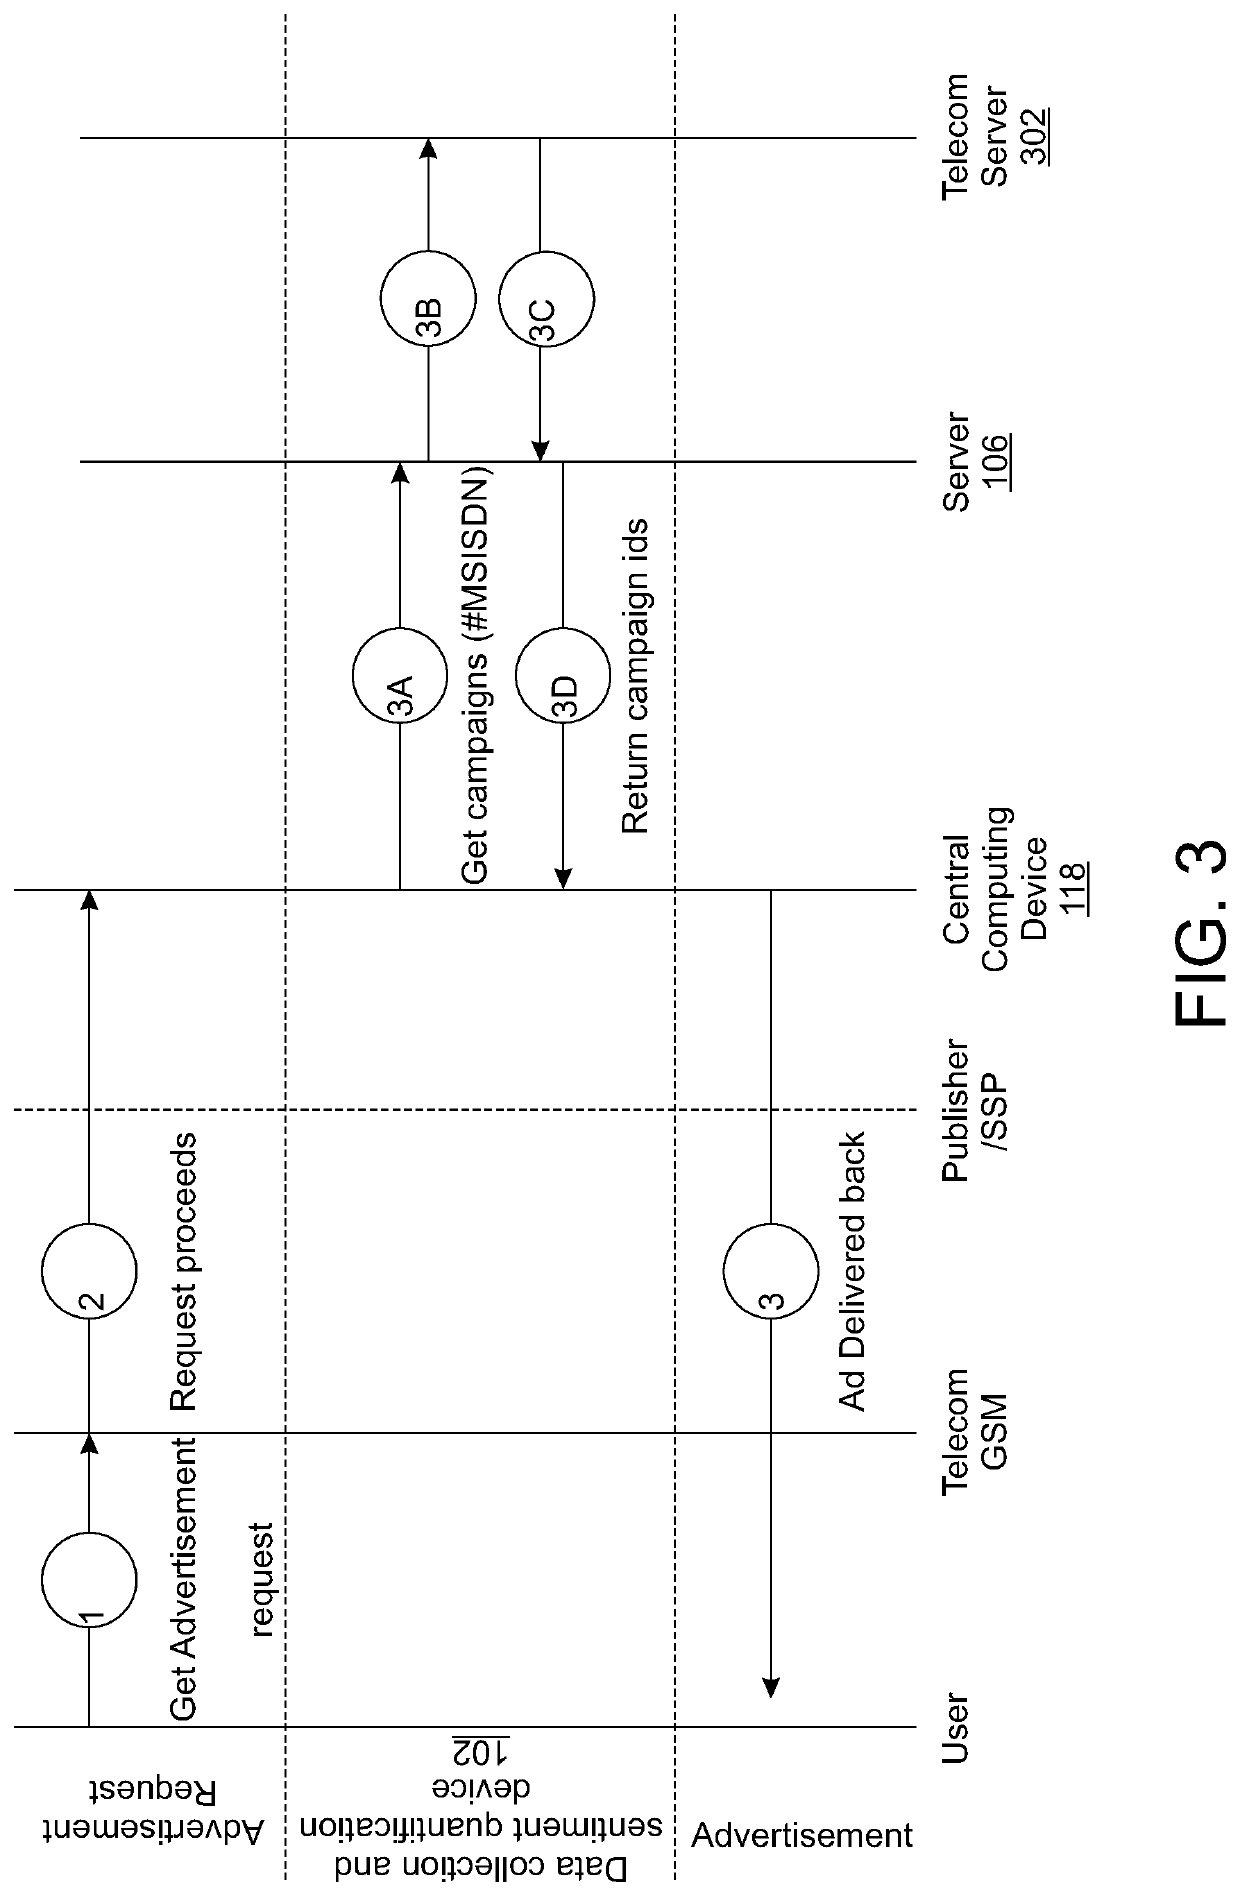 System and method to collect data to quantify sentiment of users and predict objective outcomes